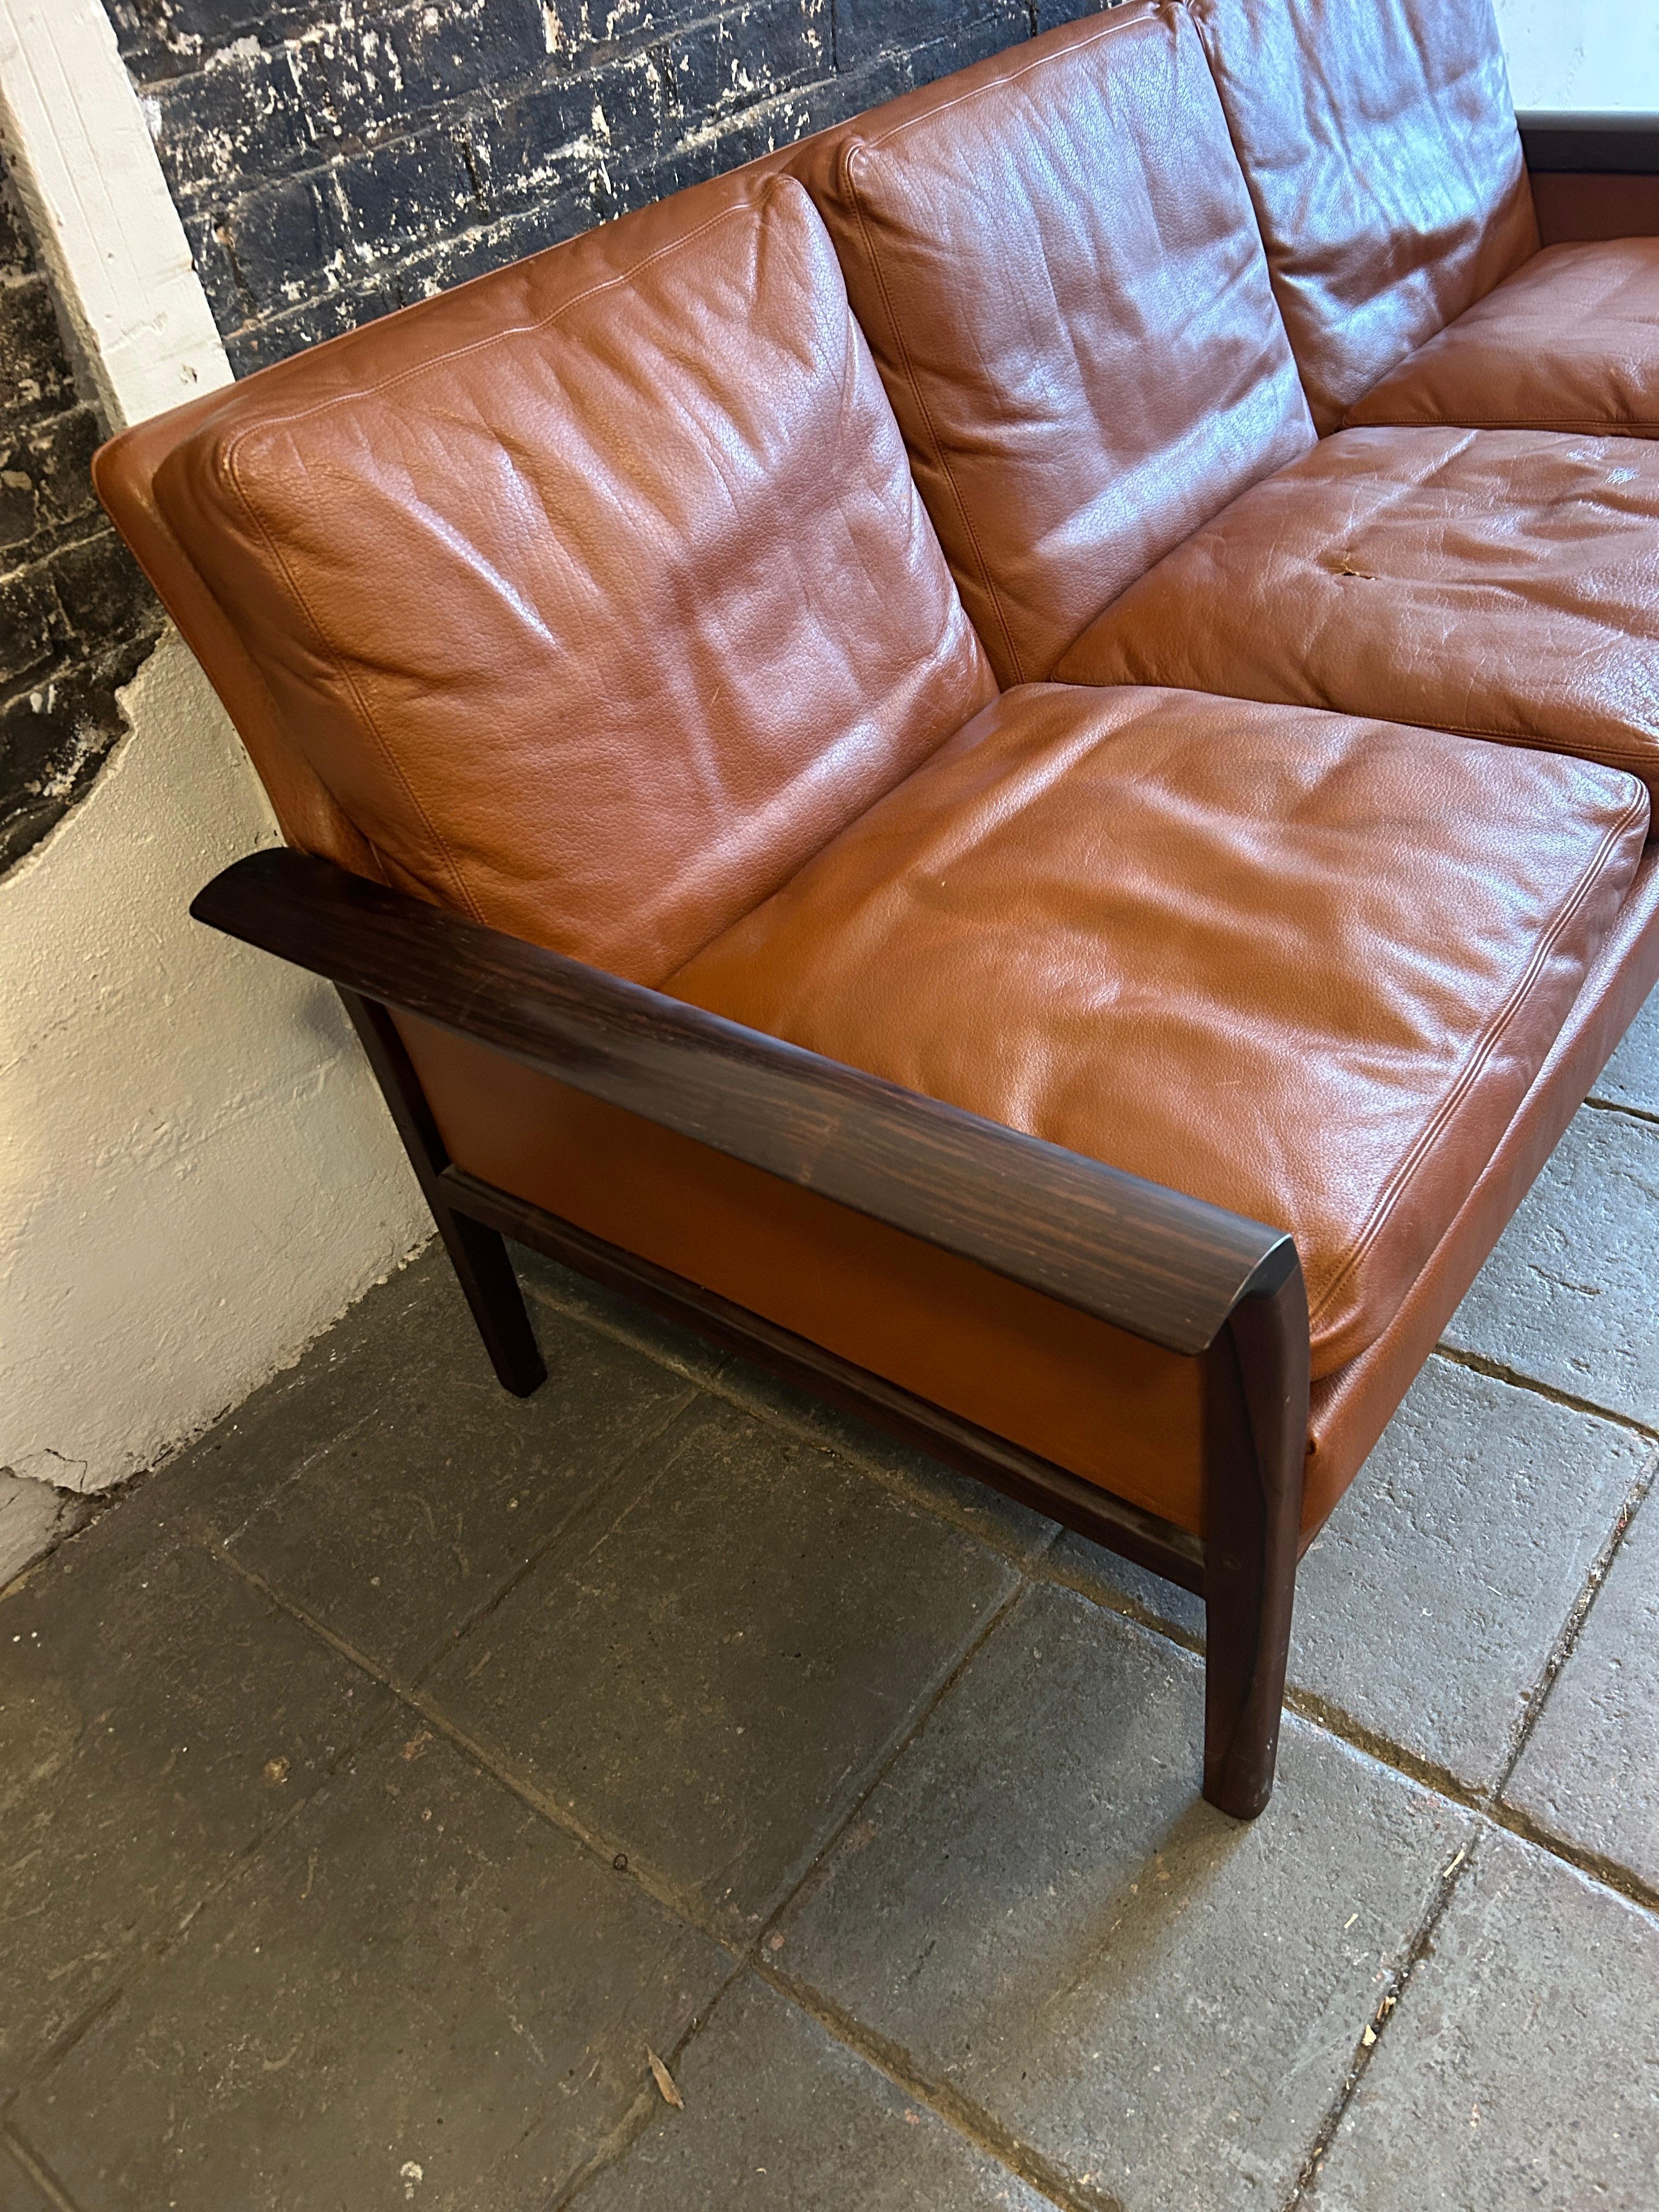 Woodwork Beautiful Knut Saeter for Vatne Mobler cognac Leather and Rosewood Sofa For Sale